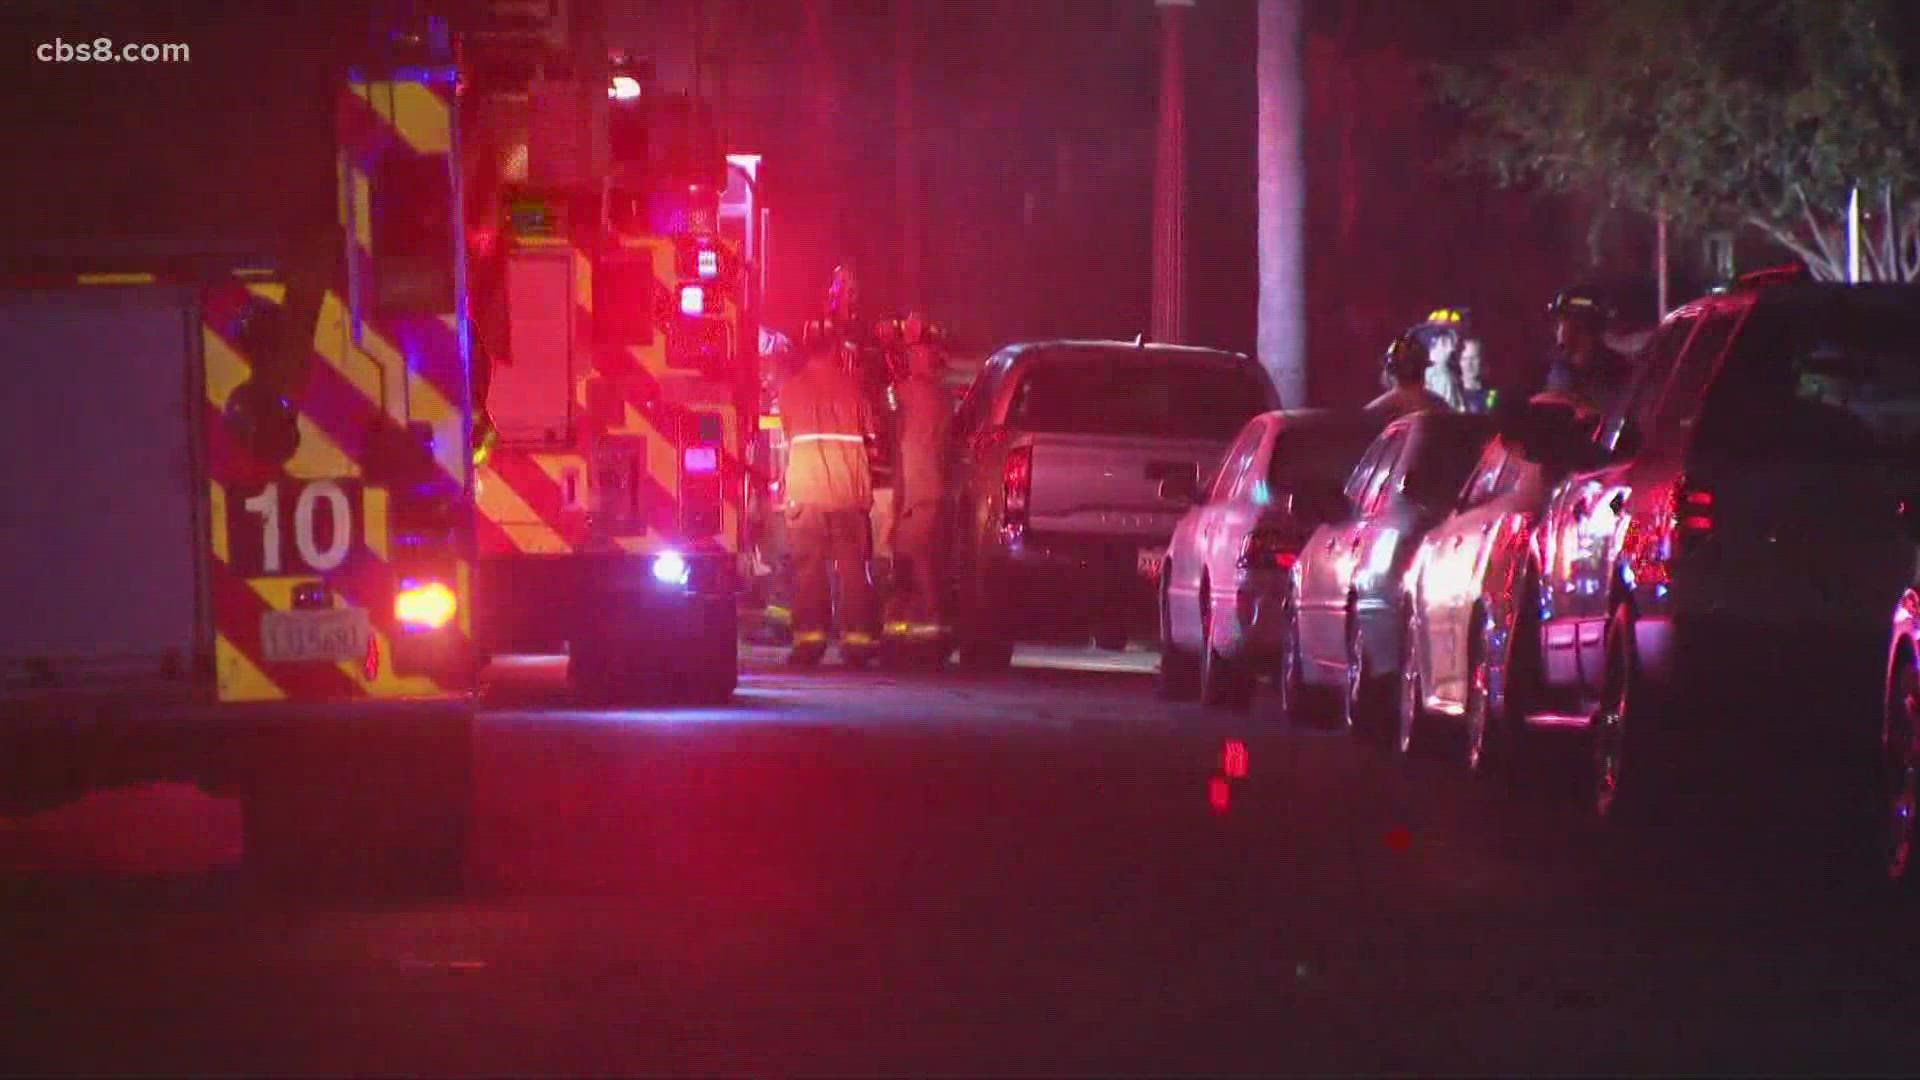 San Diego Police say at 8:50 p.m., a neighbor saw smoke and flames from a nearby home and called 911.